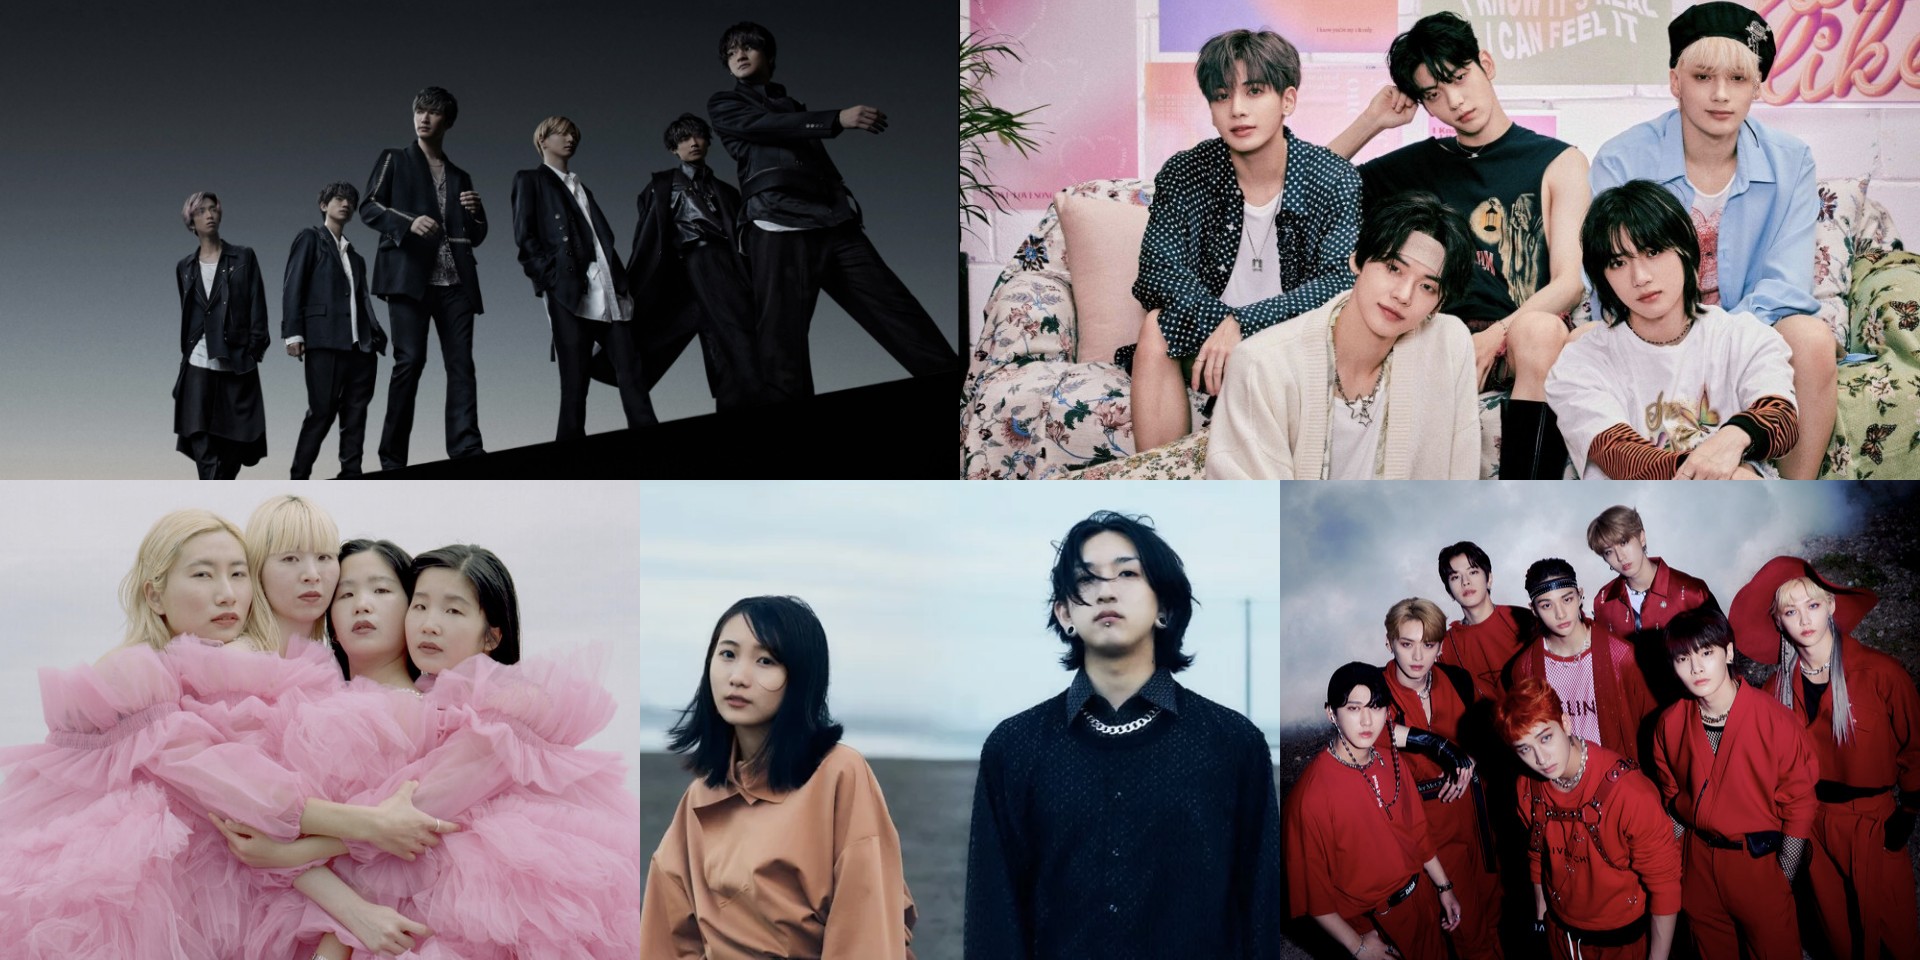 The First Take episodes to check out – SixTONES, TXT, CHAI, Stray Kids, YOASOBI, and more